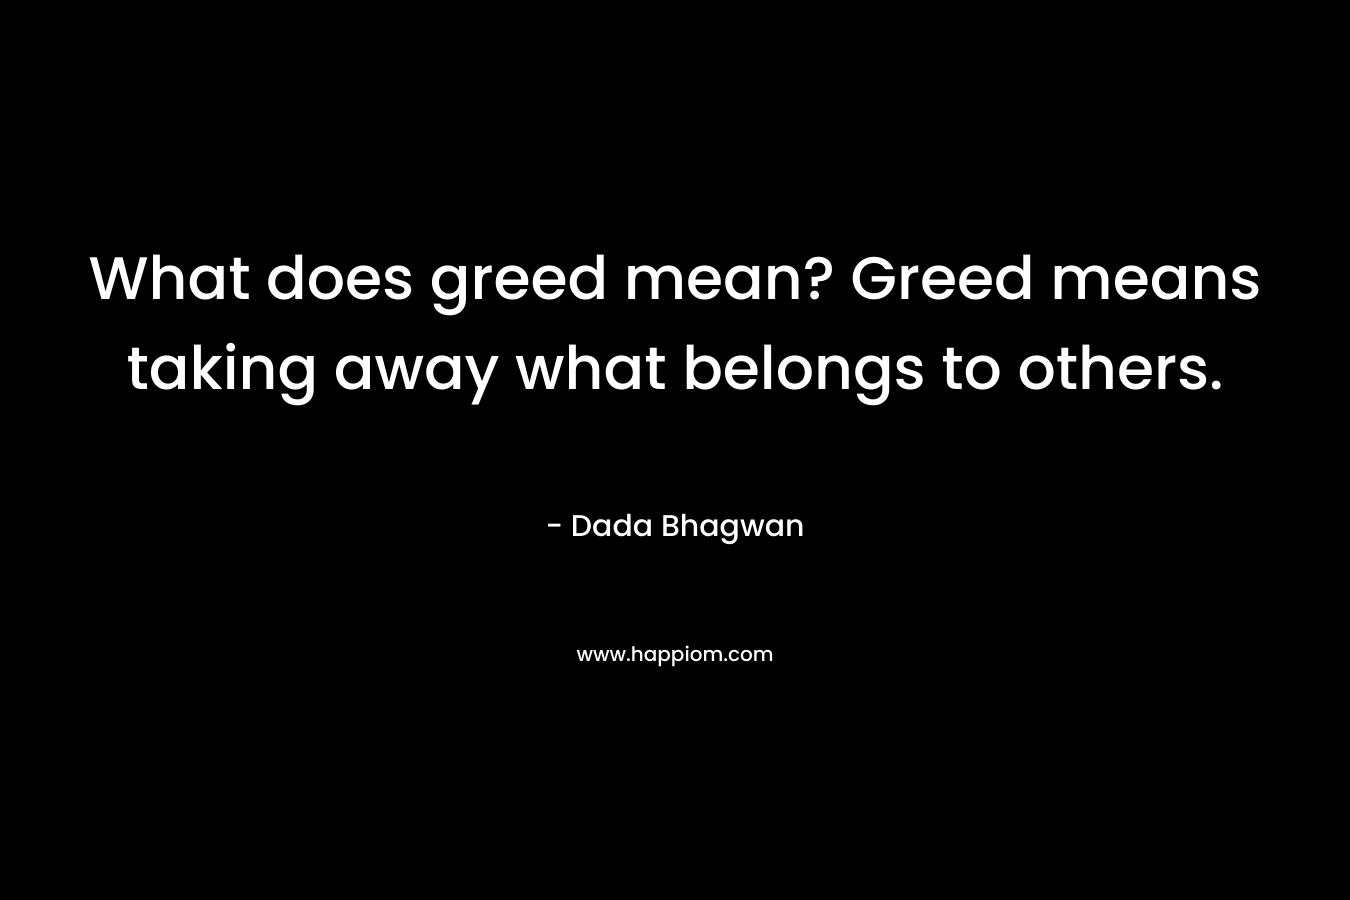 What does greed mean? Greed means taking away what belongs to others.